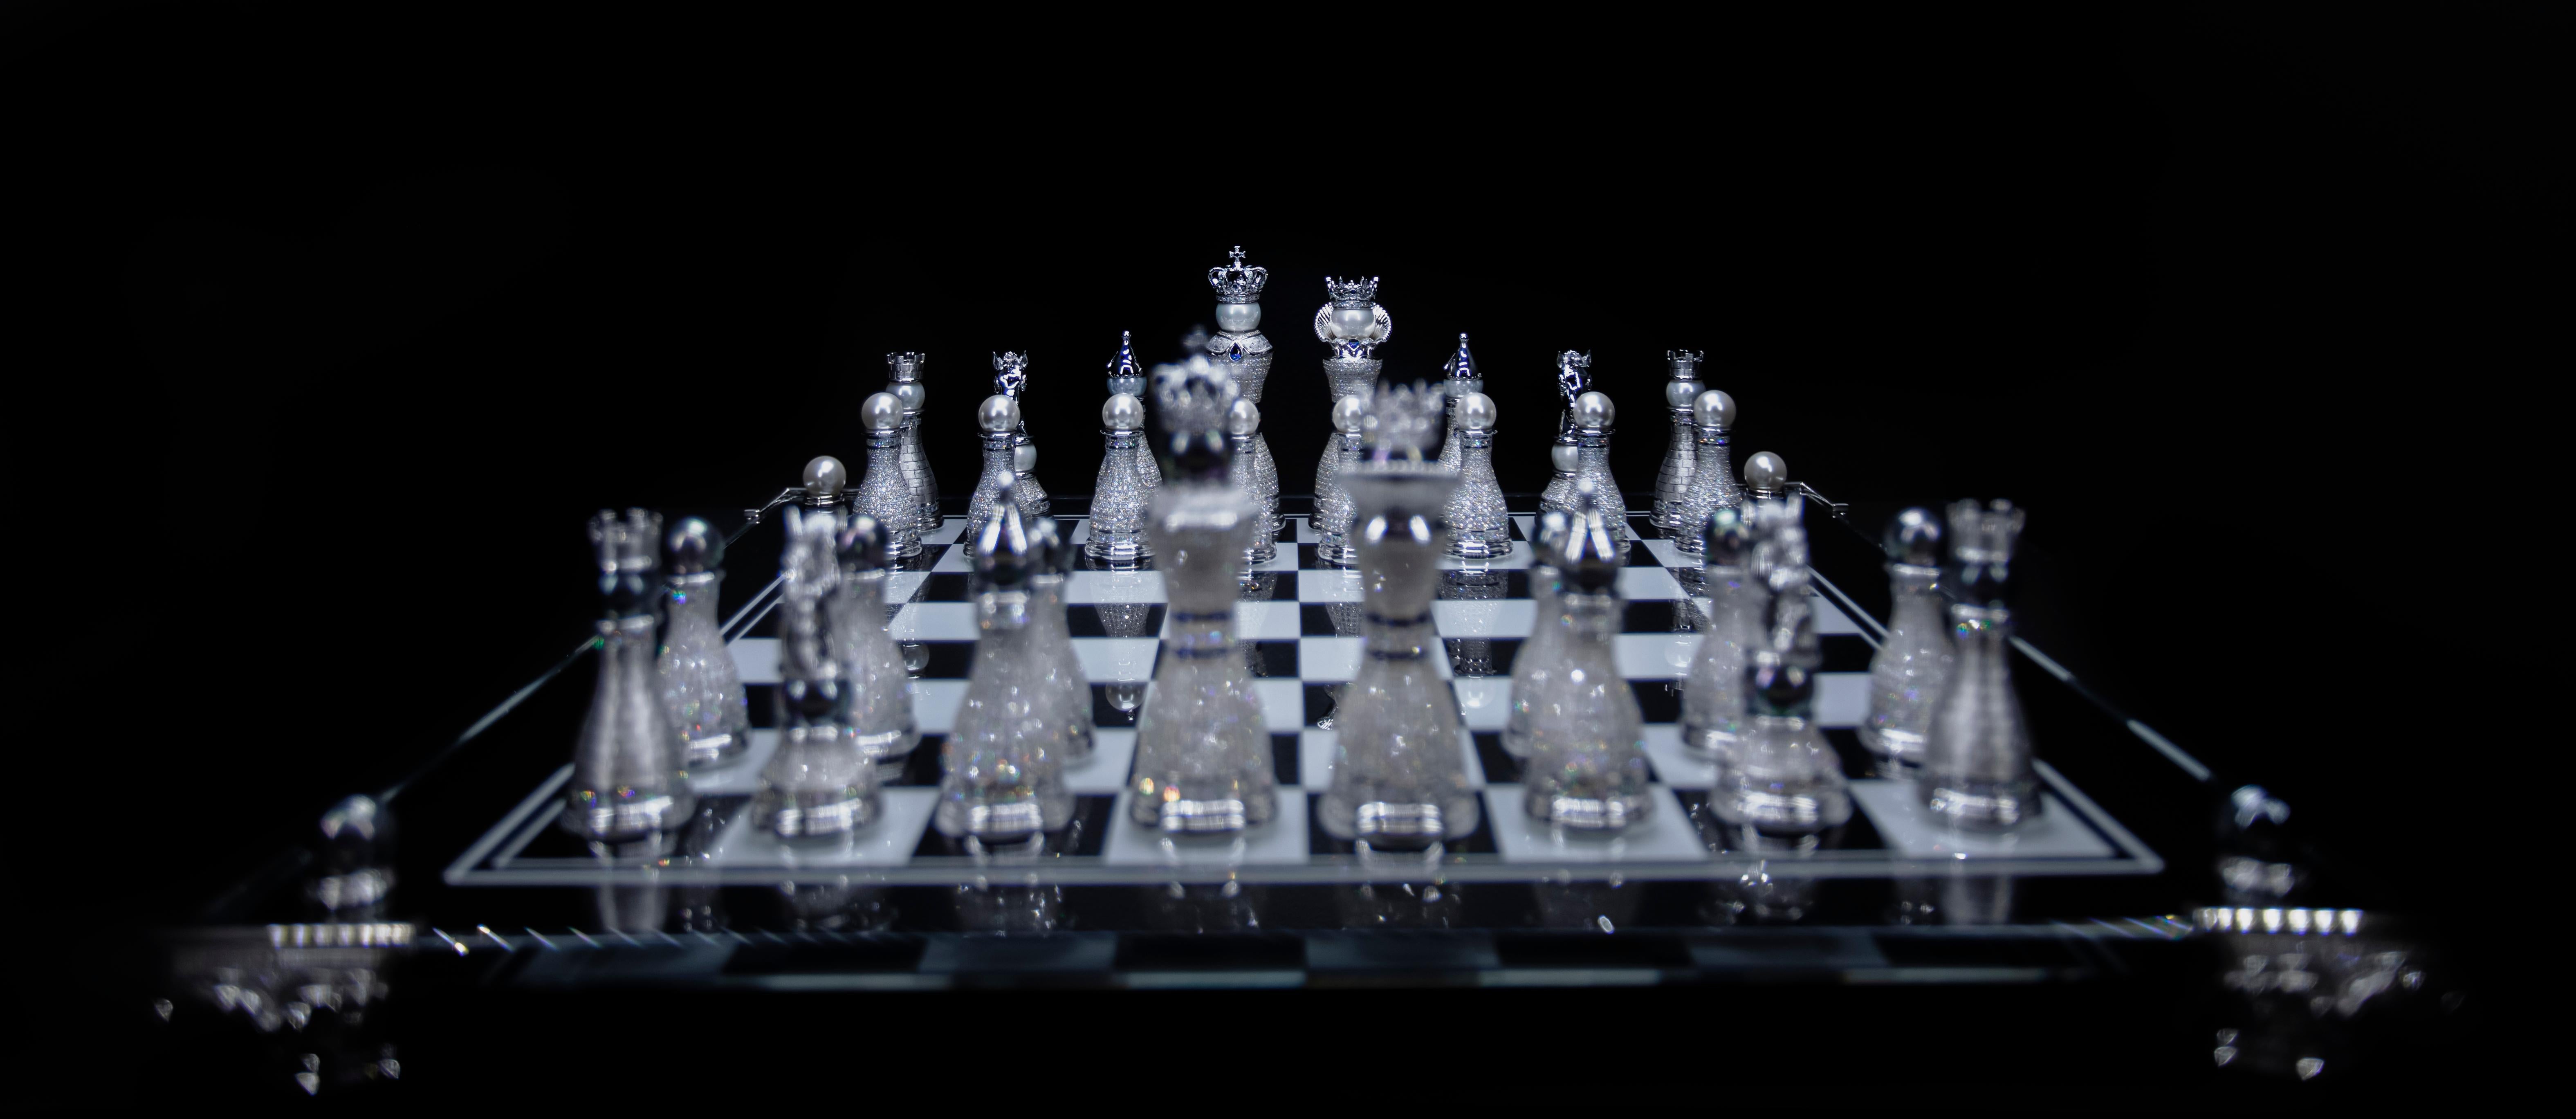 Precious Stone Pearl Royale 18K White Gold, Diamond, Sapphire and South Sea Pearl Chess Set For Sale